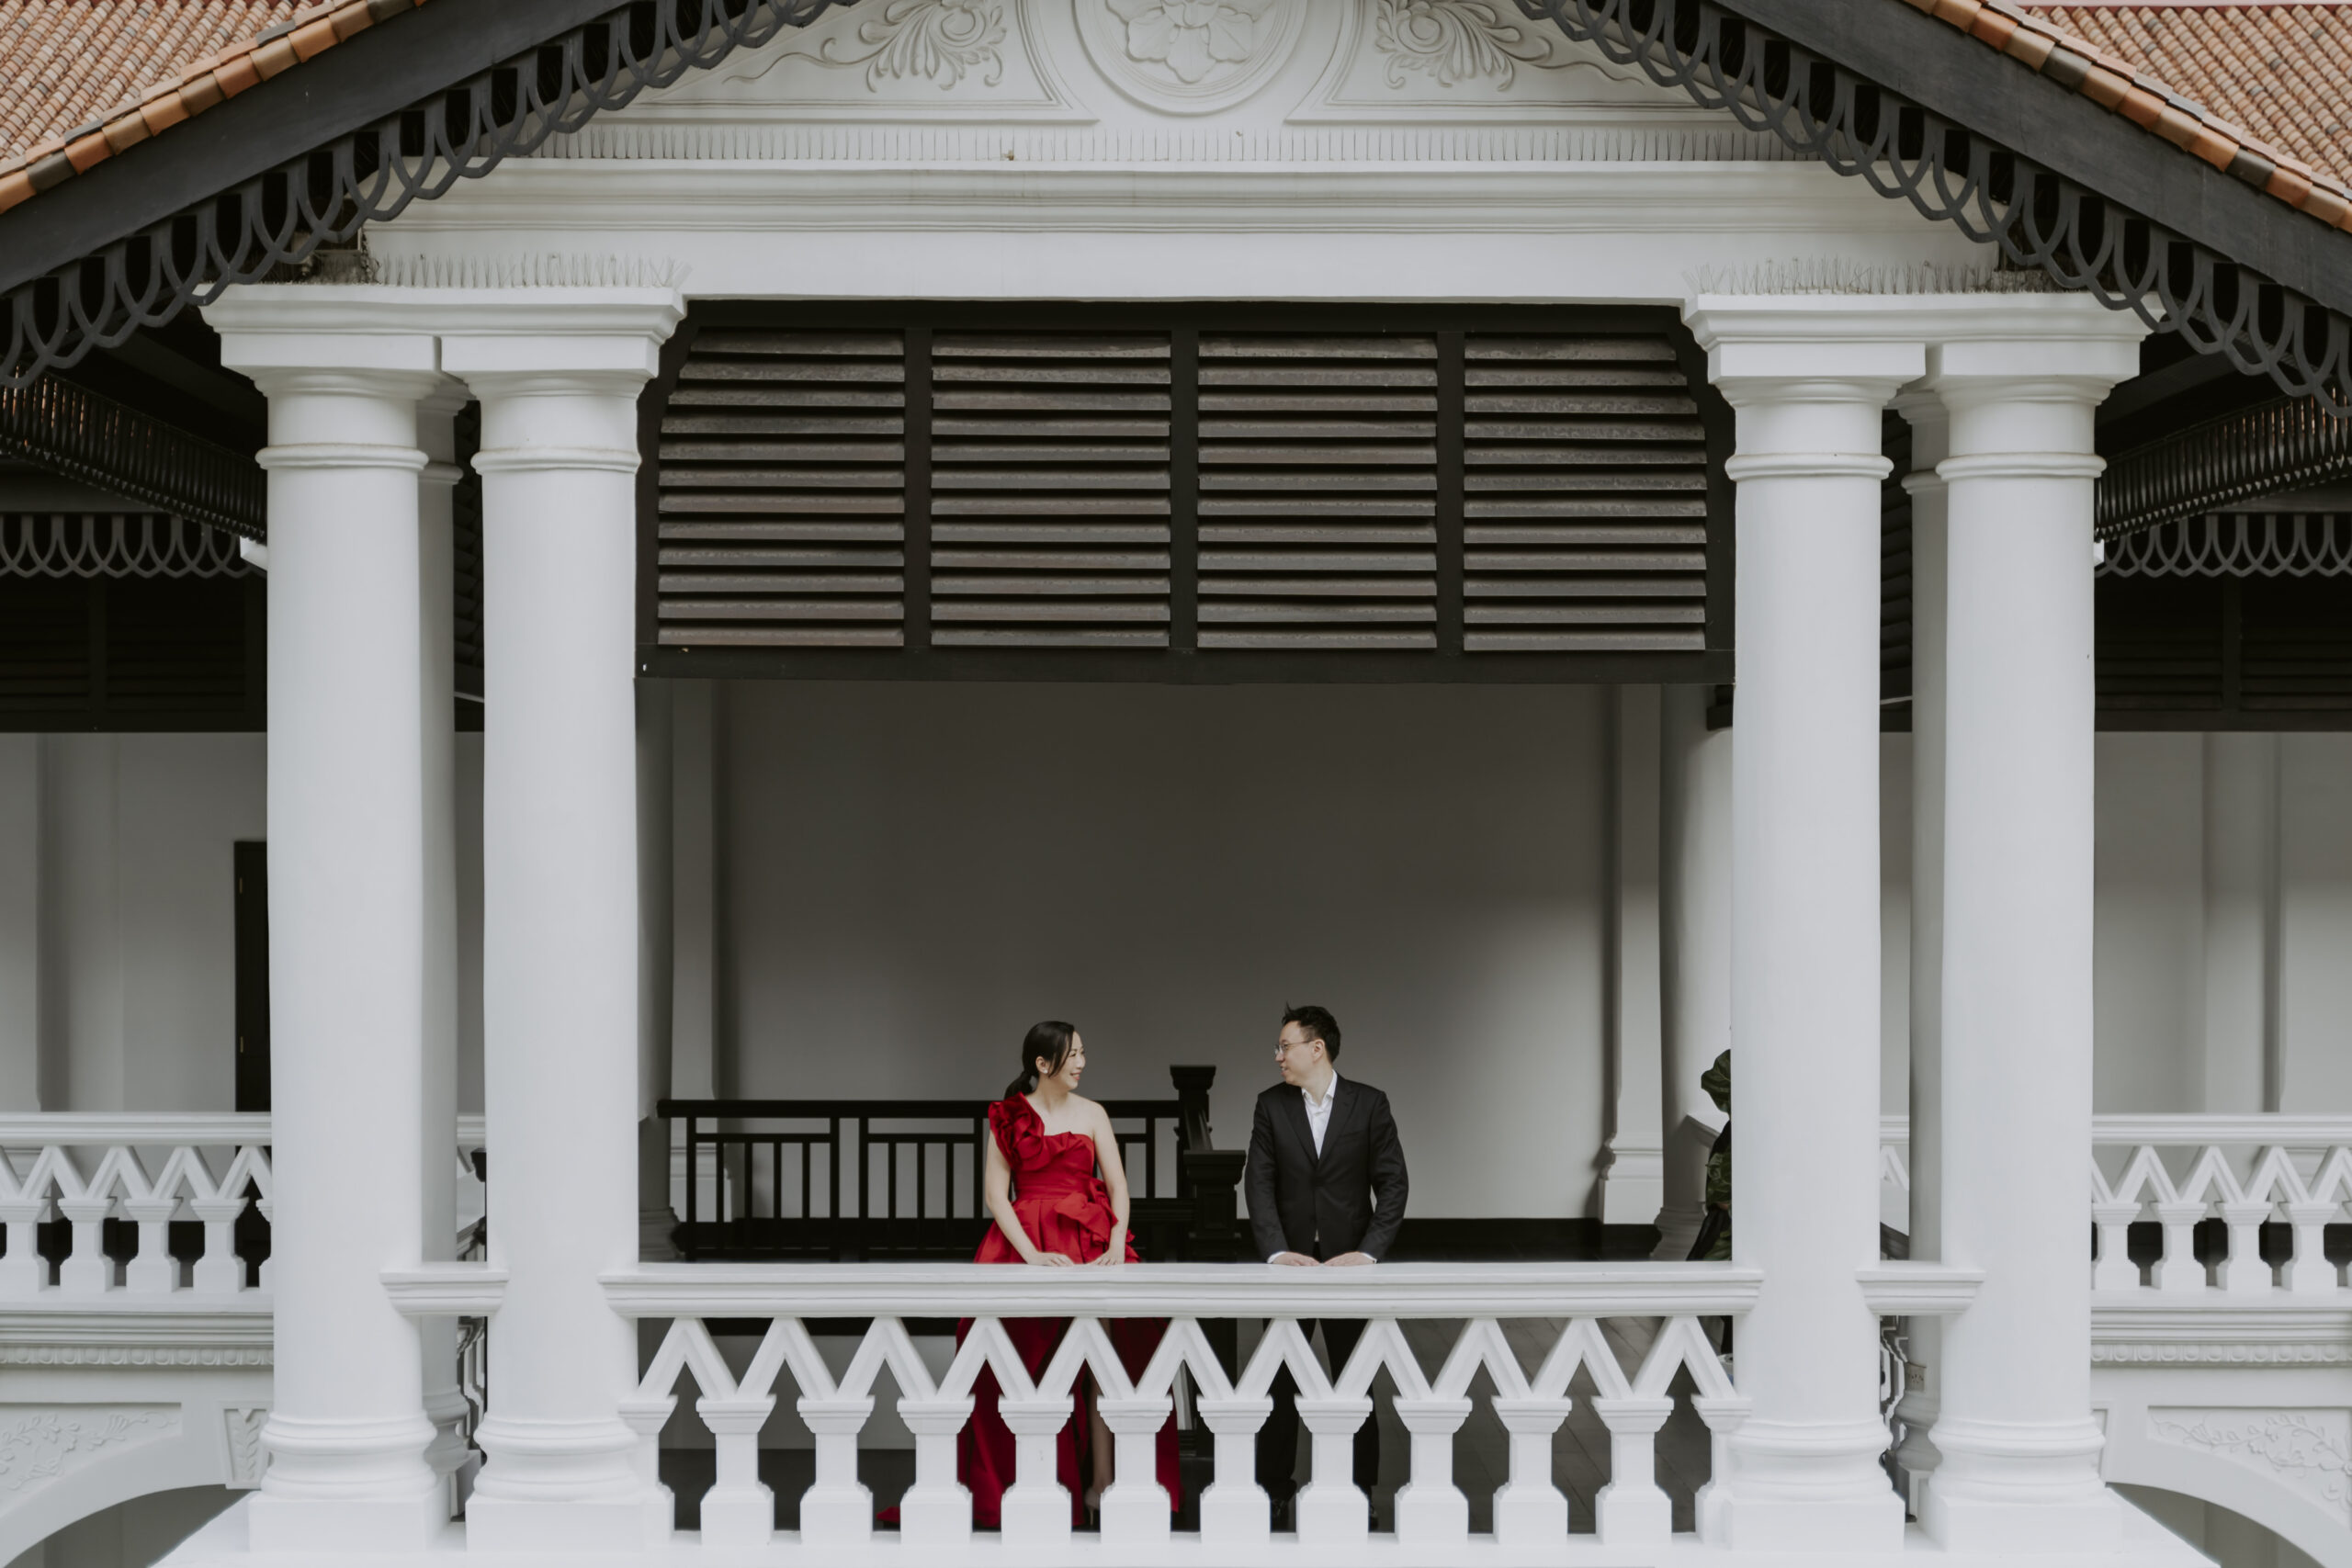 A couple in a red dress standing on the balcony of the Raffles Hotel in Singapore